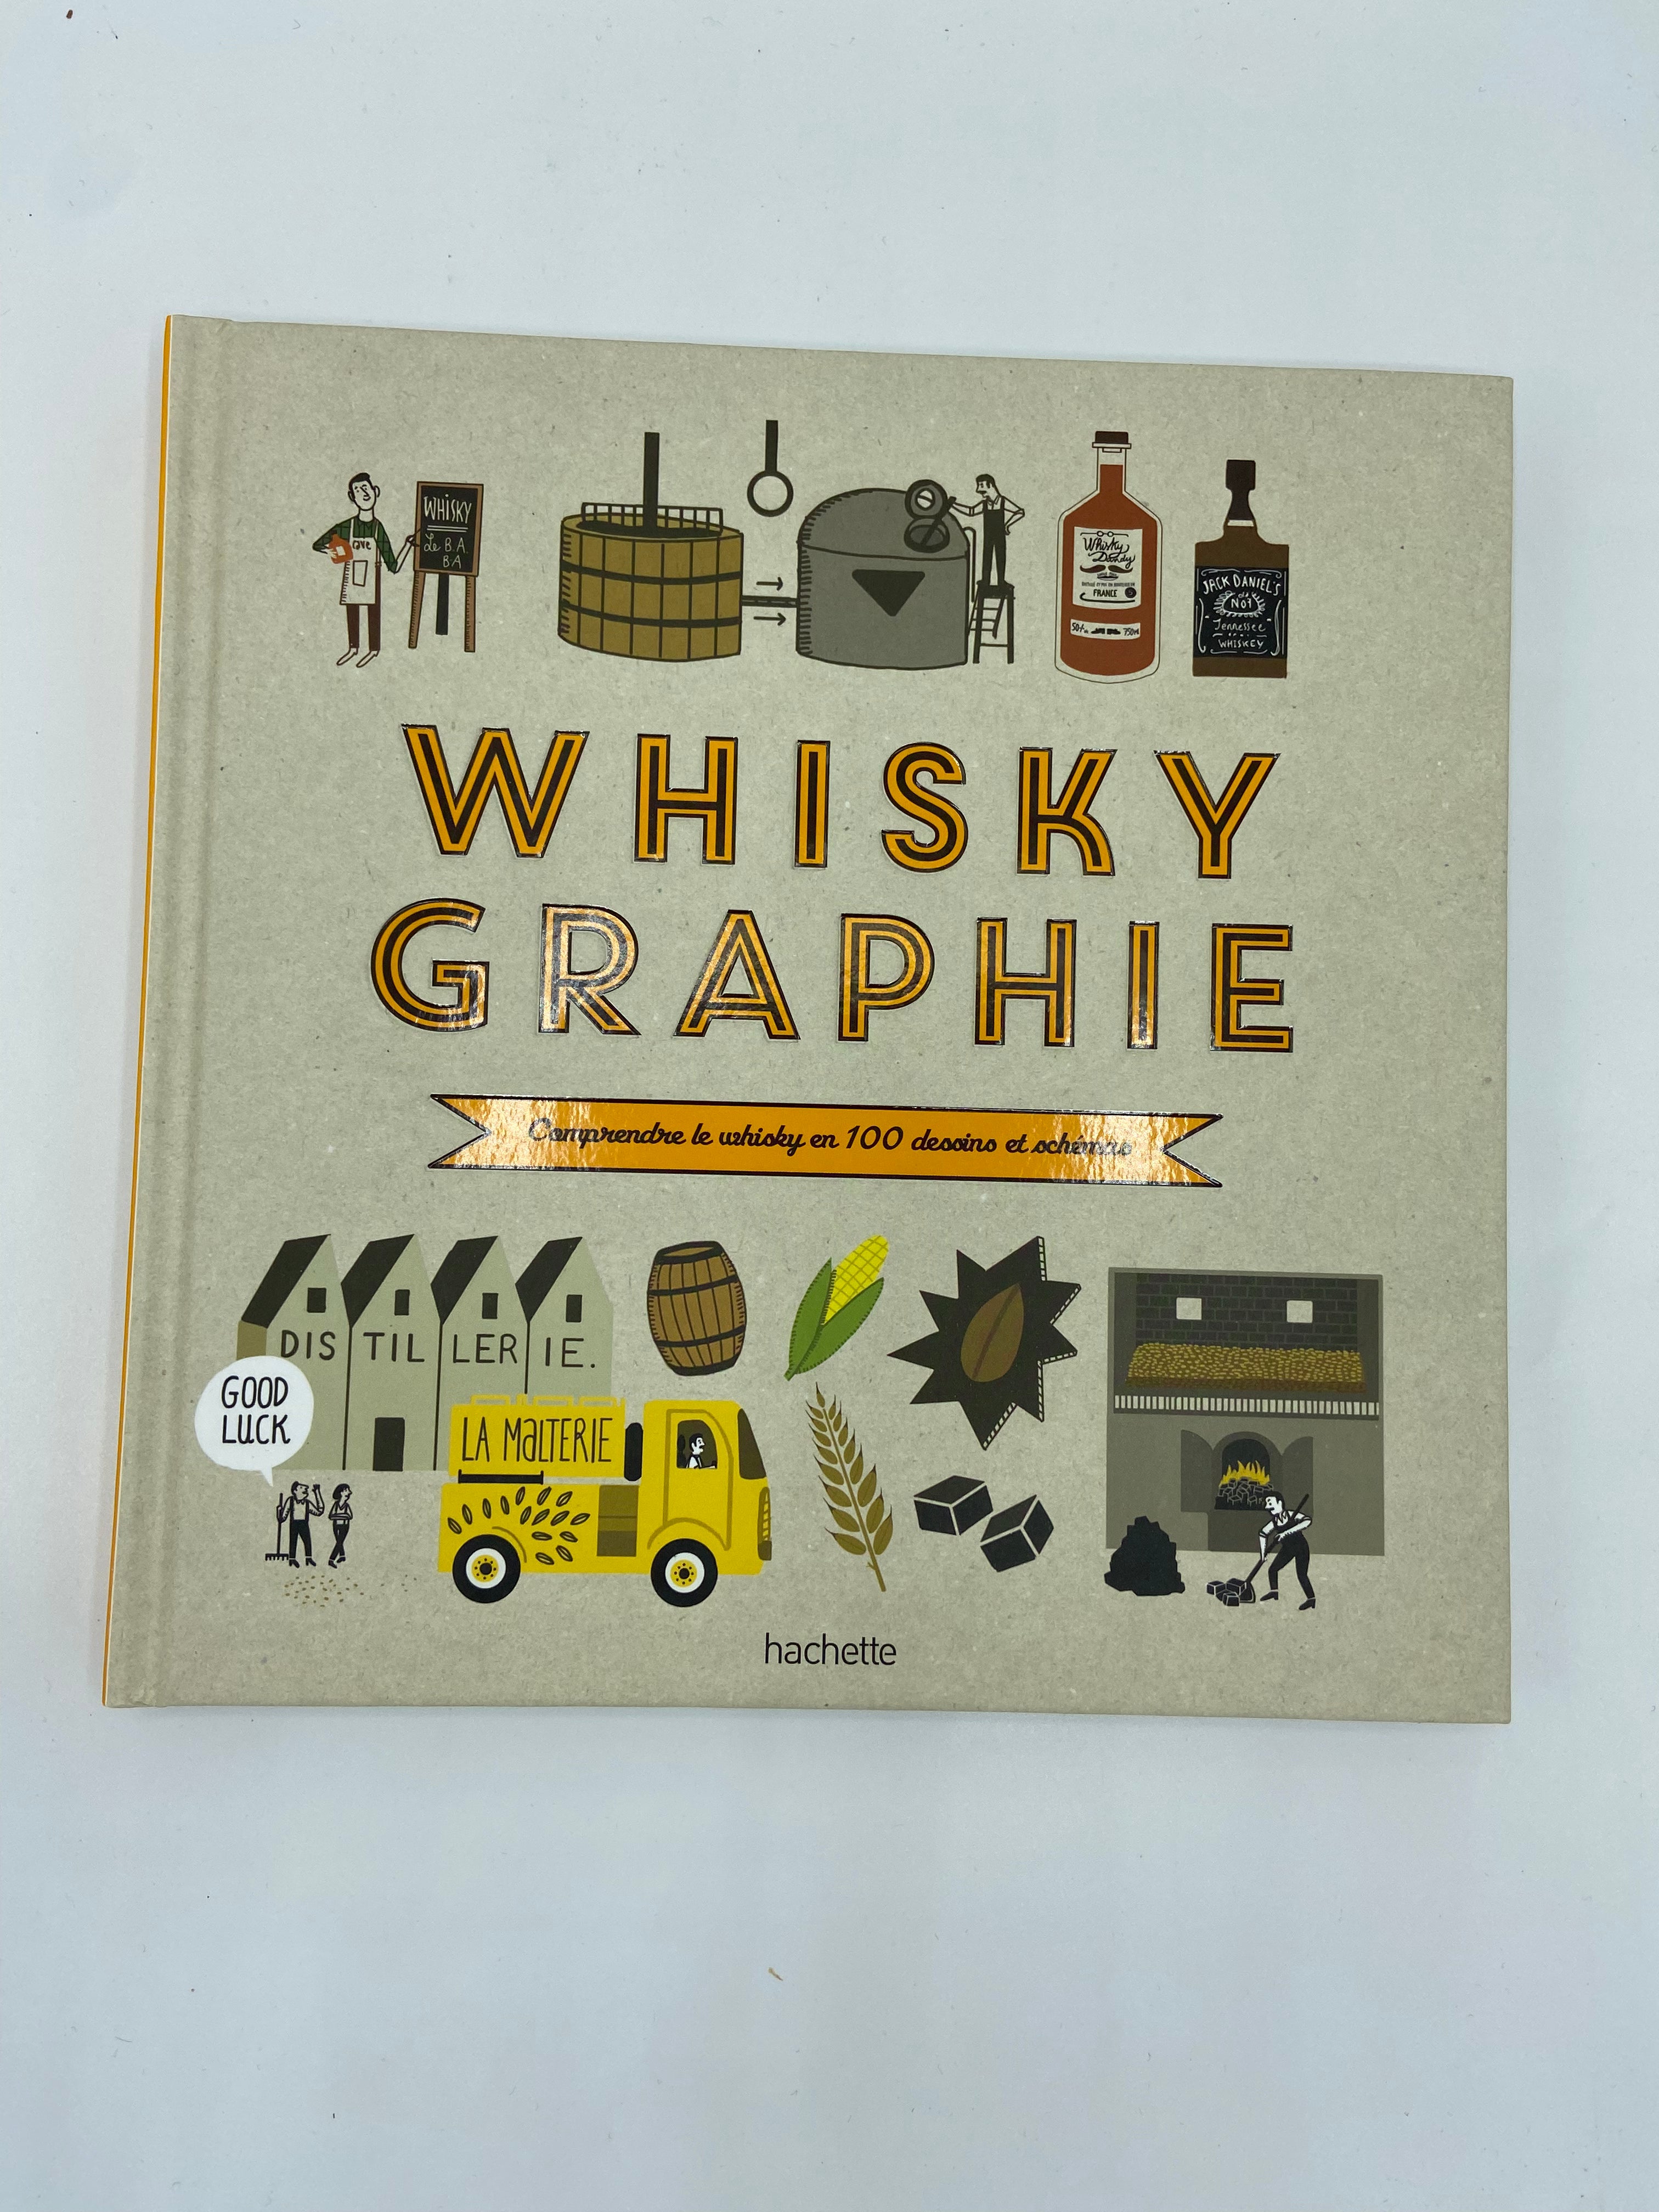 “WhiskyGraphie” – Hachette